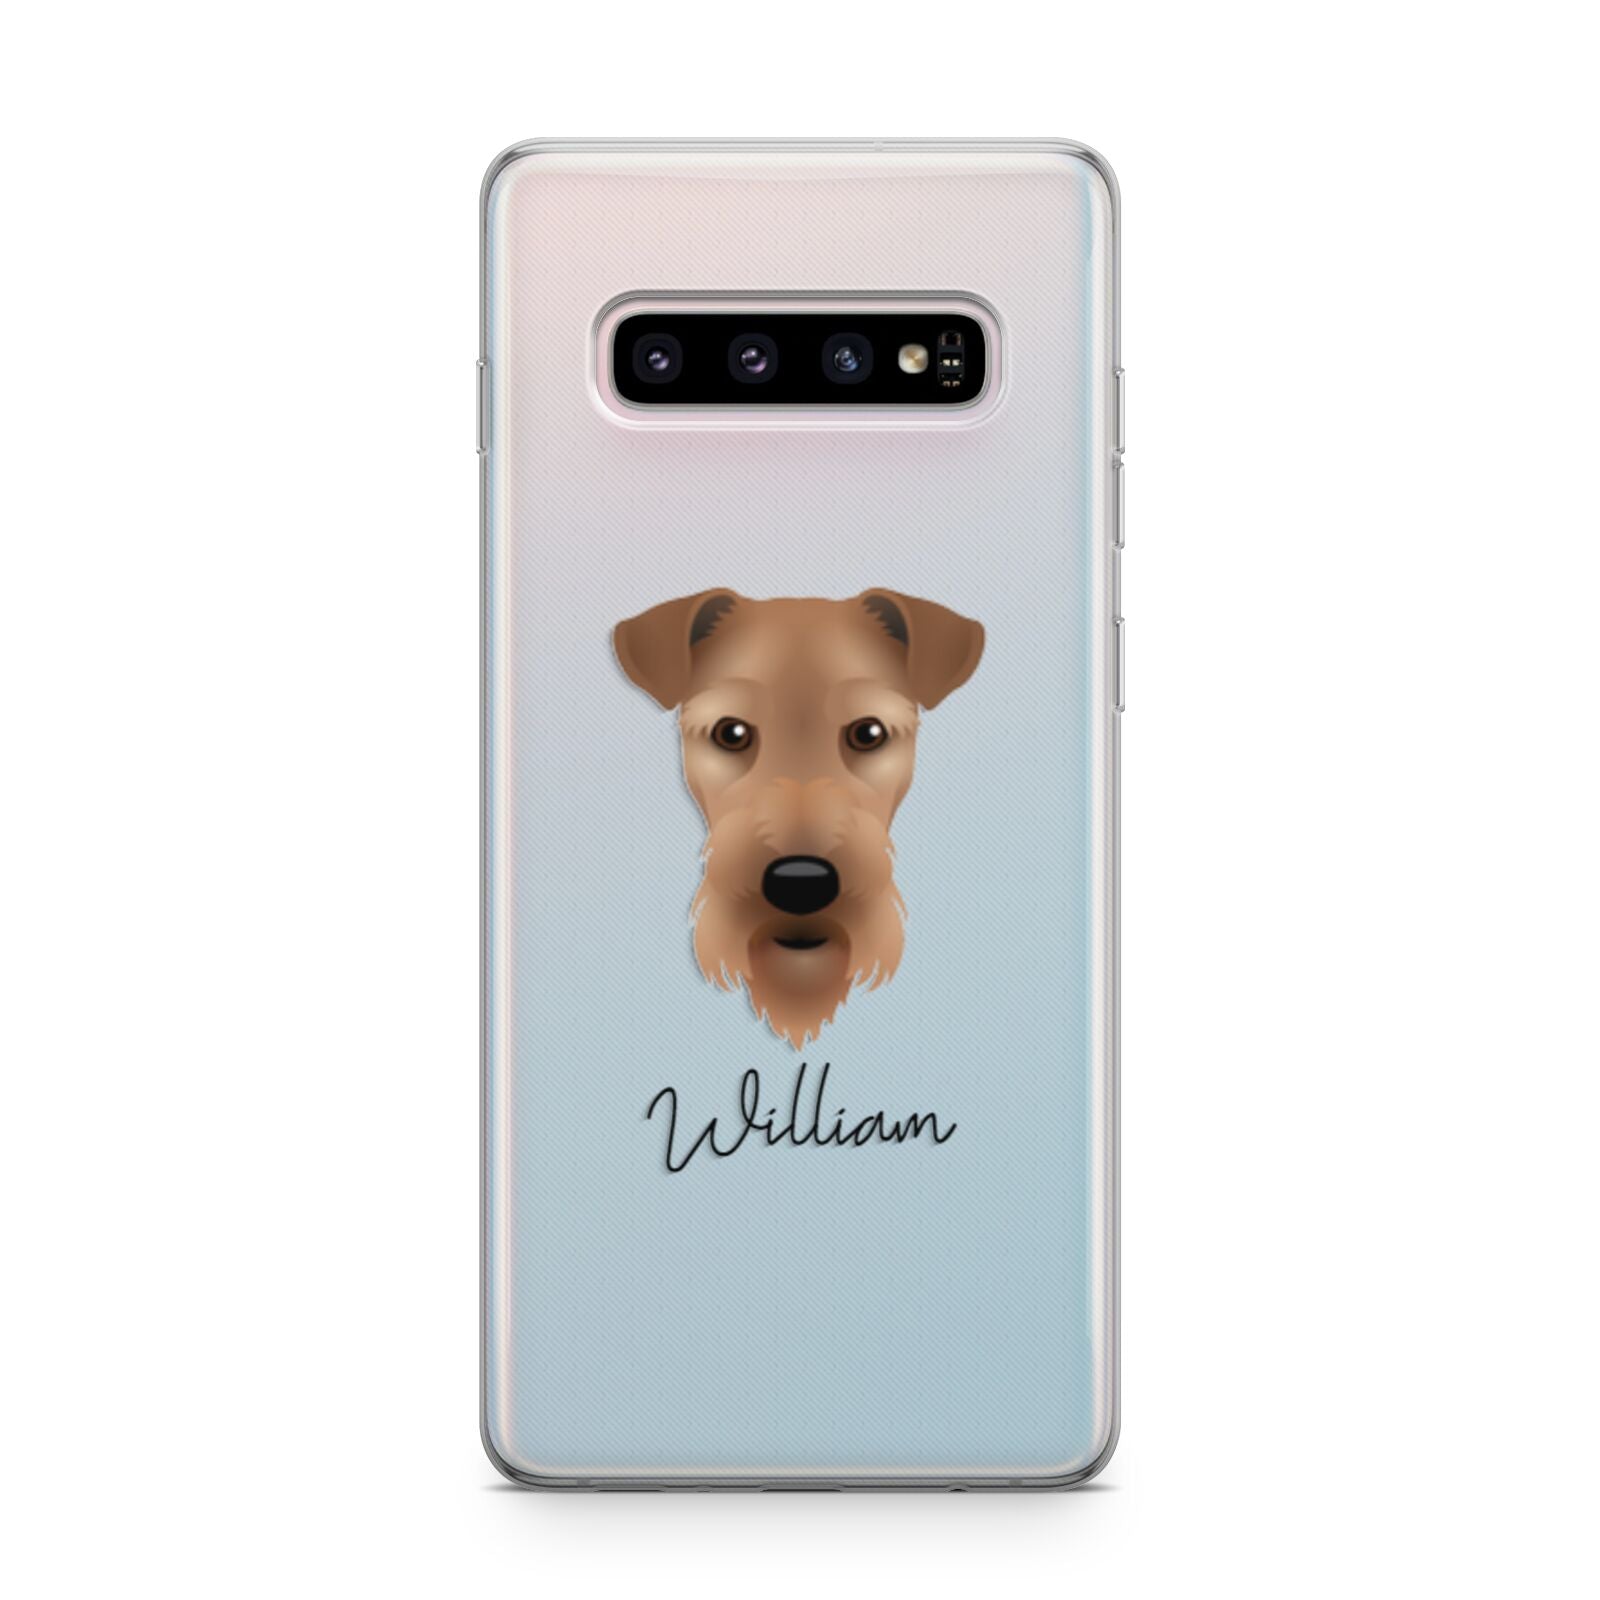 Airedale Terrier Personalised Samsung Galaxy S10 Plus Case